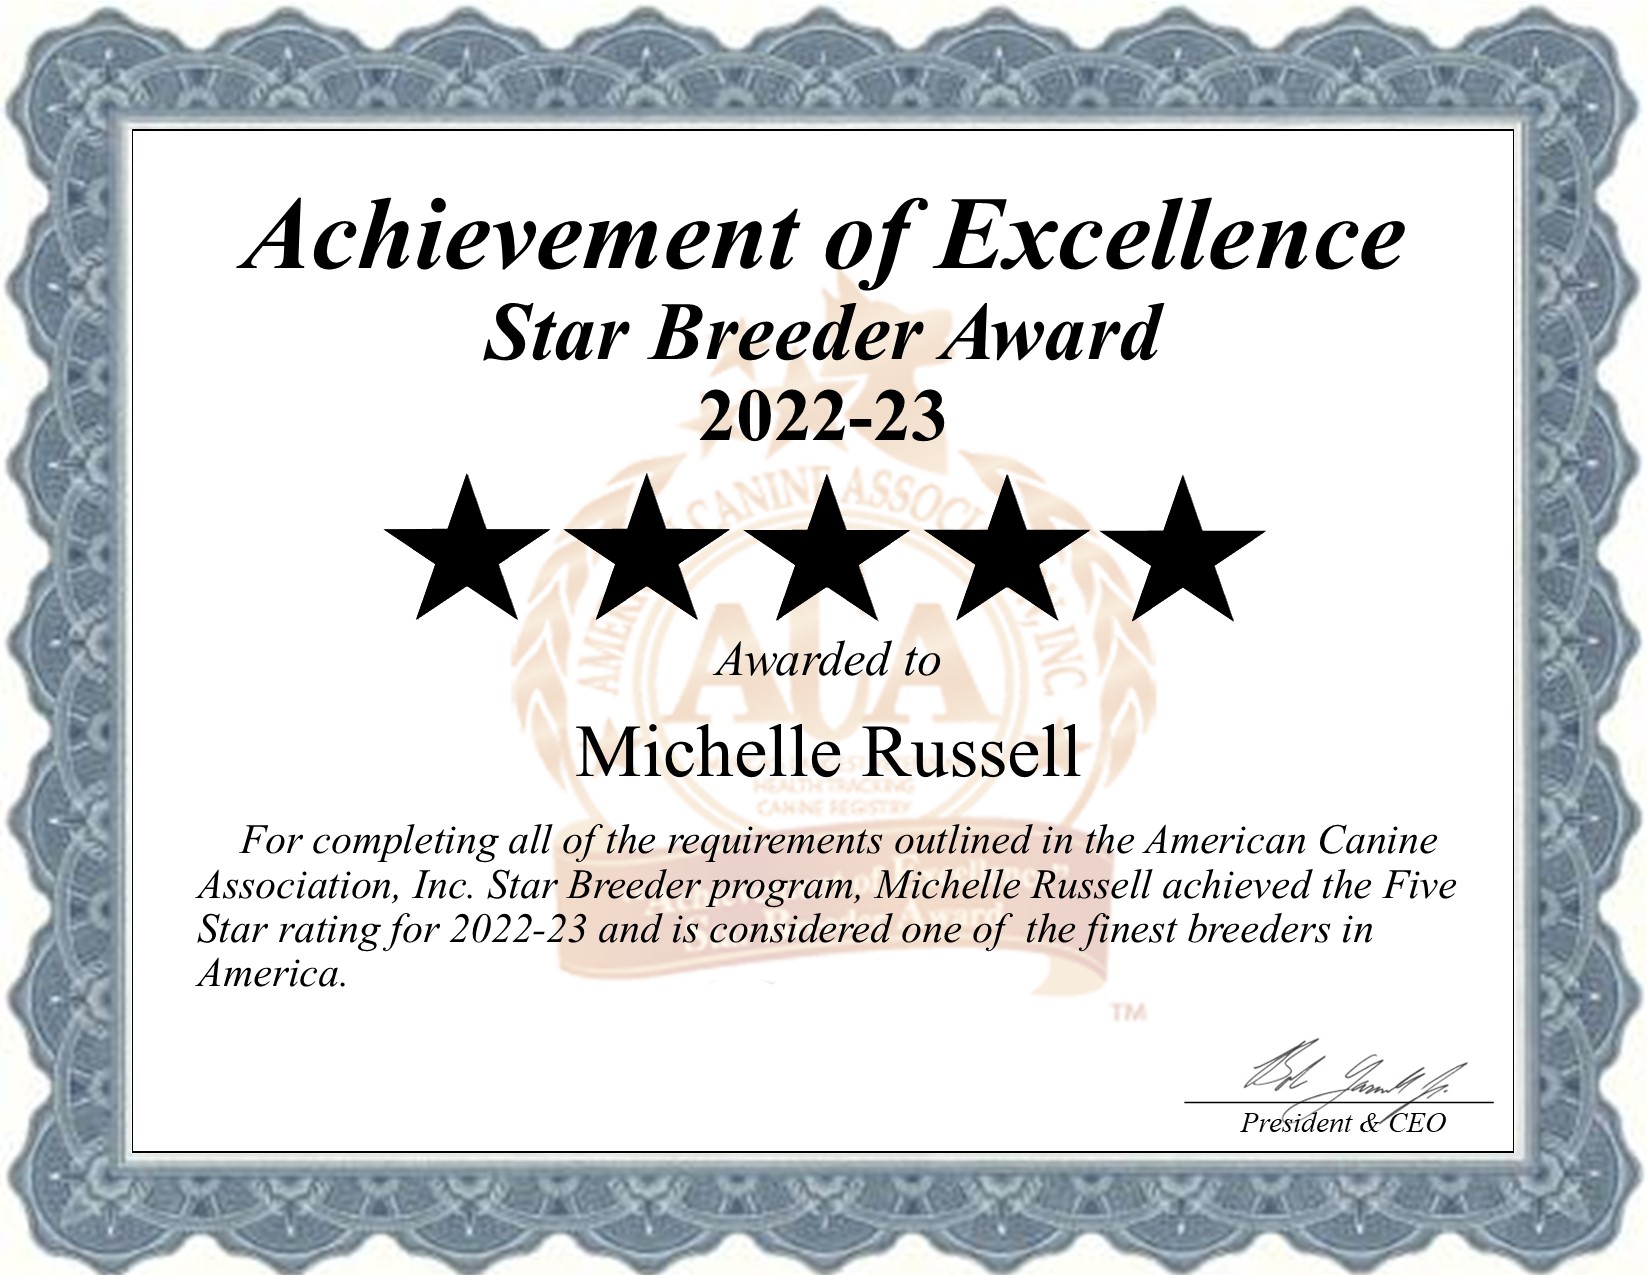 Michelle, Russell, dog, breeder, star, certificate, Michelle-Russell, Erie, KS, Kansas, puppy, dog, kennels, mill, puppymill, usda, 5-star, aca, ica, registered, french, bulldogs, frenchies, 48-A-1869, 48a1869